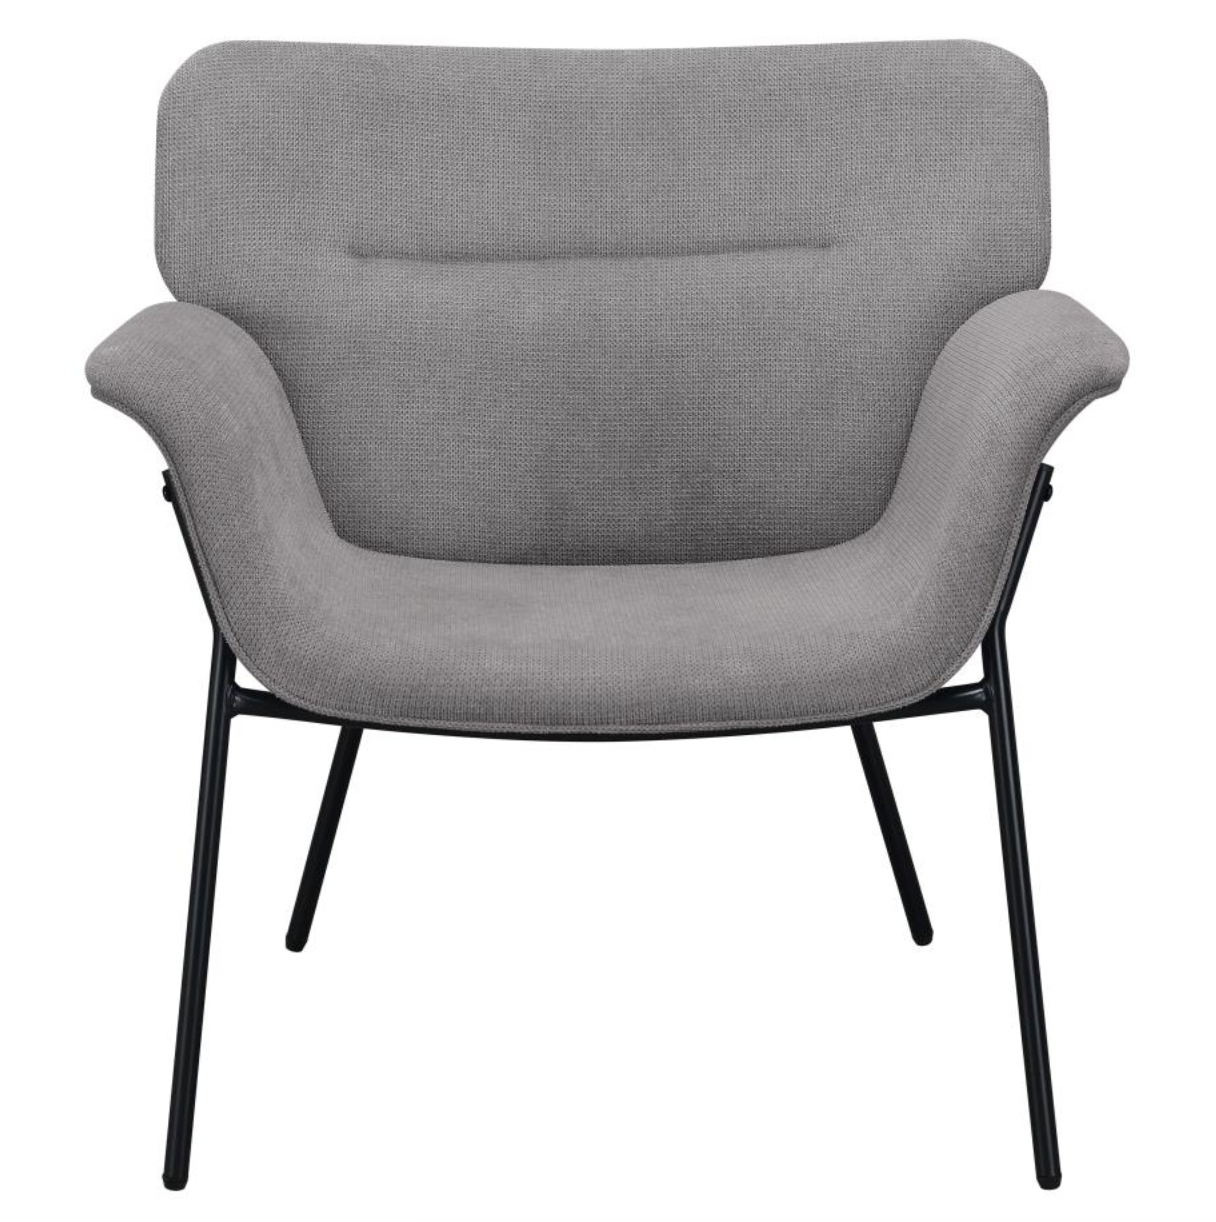 DAVINA Upholstered Flared Arms Accent Chair Grey